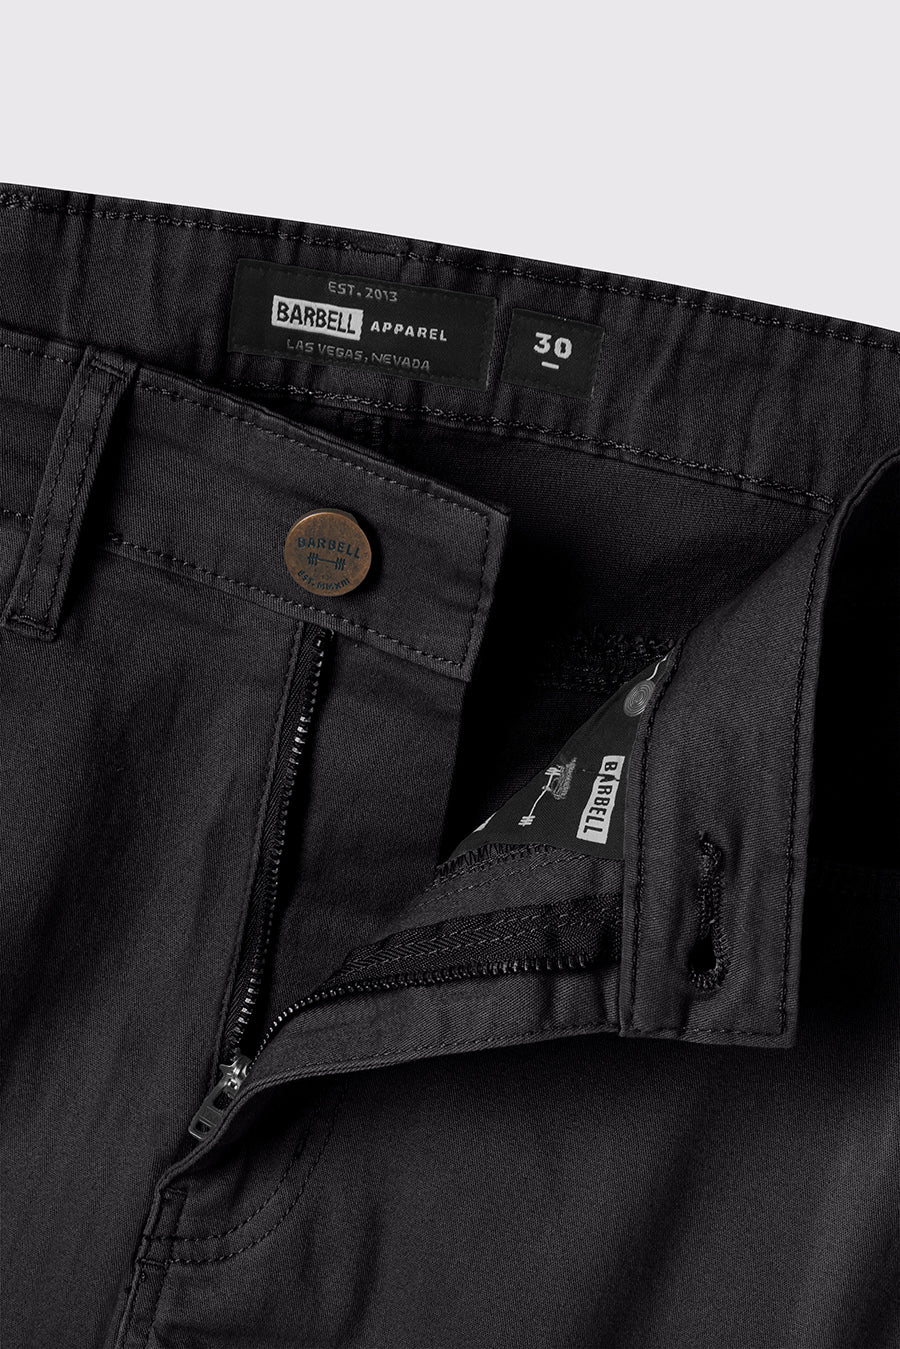 Athletic Fit Chino Pant 2.0 - Black - photo from button detail #color_black